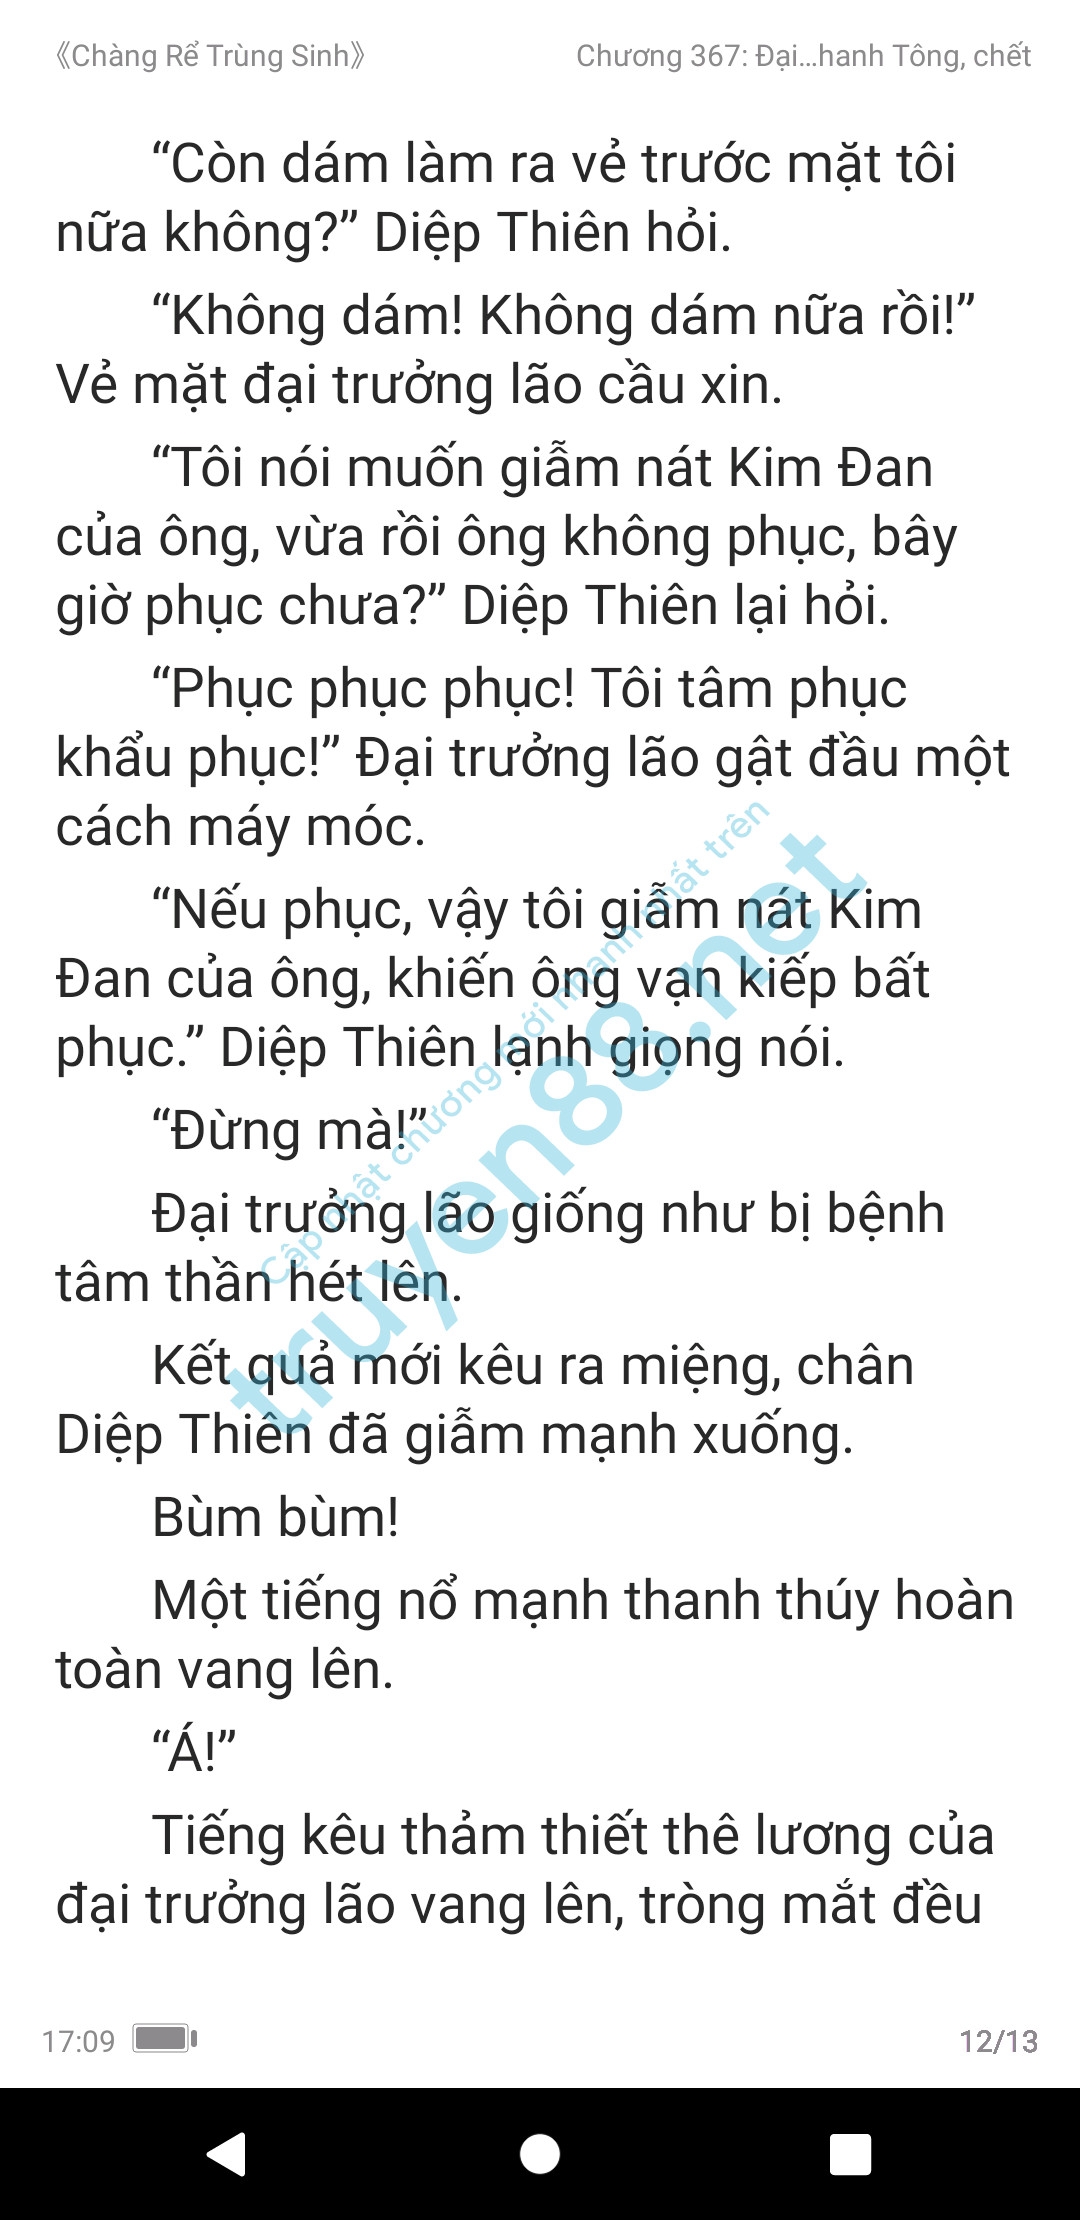 chang-re-trung-sinh-367-0